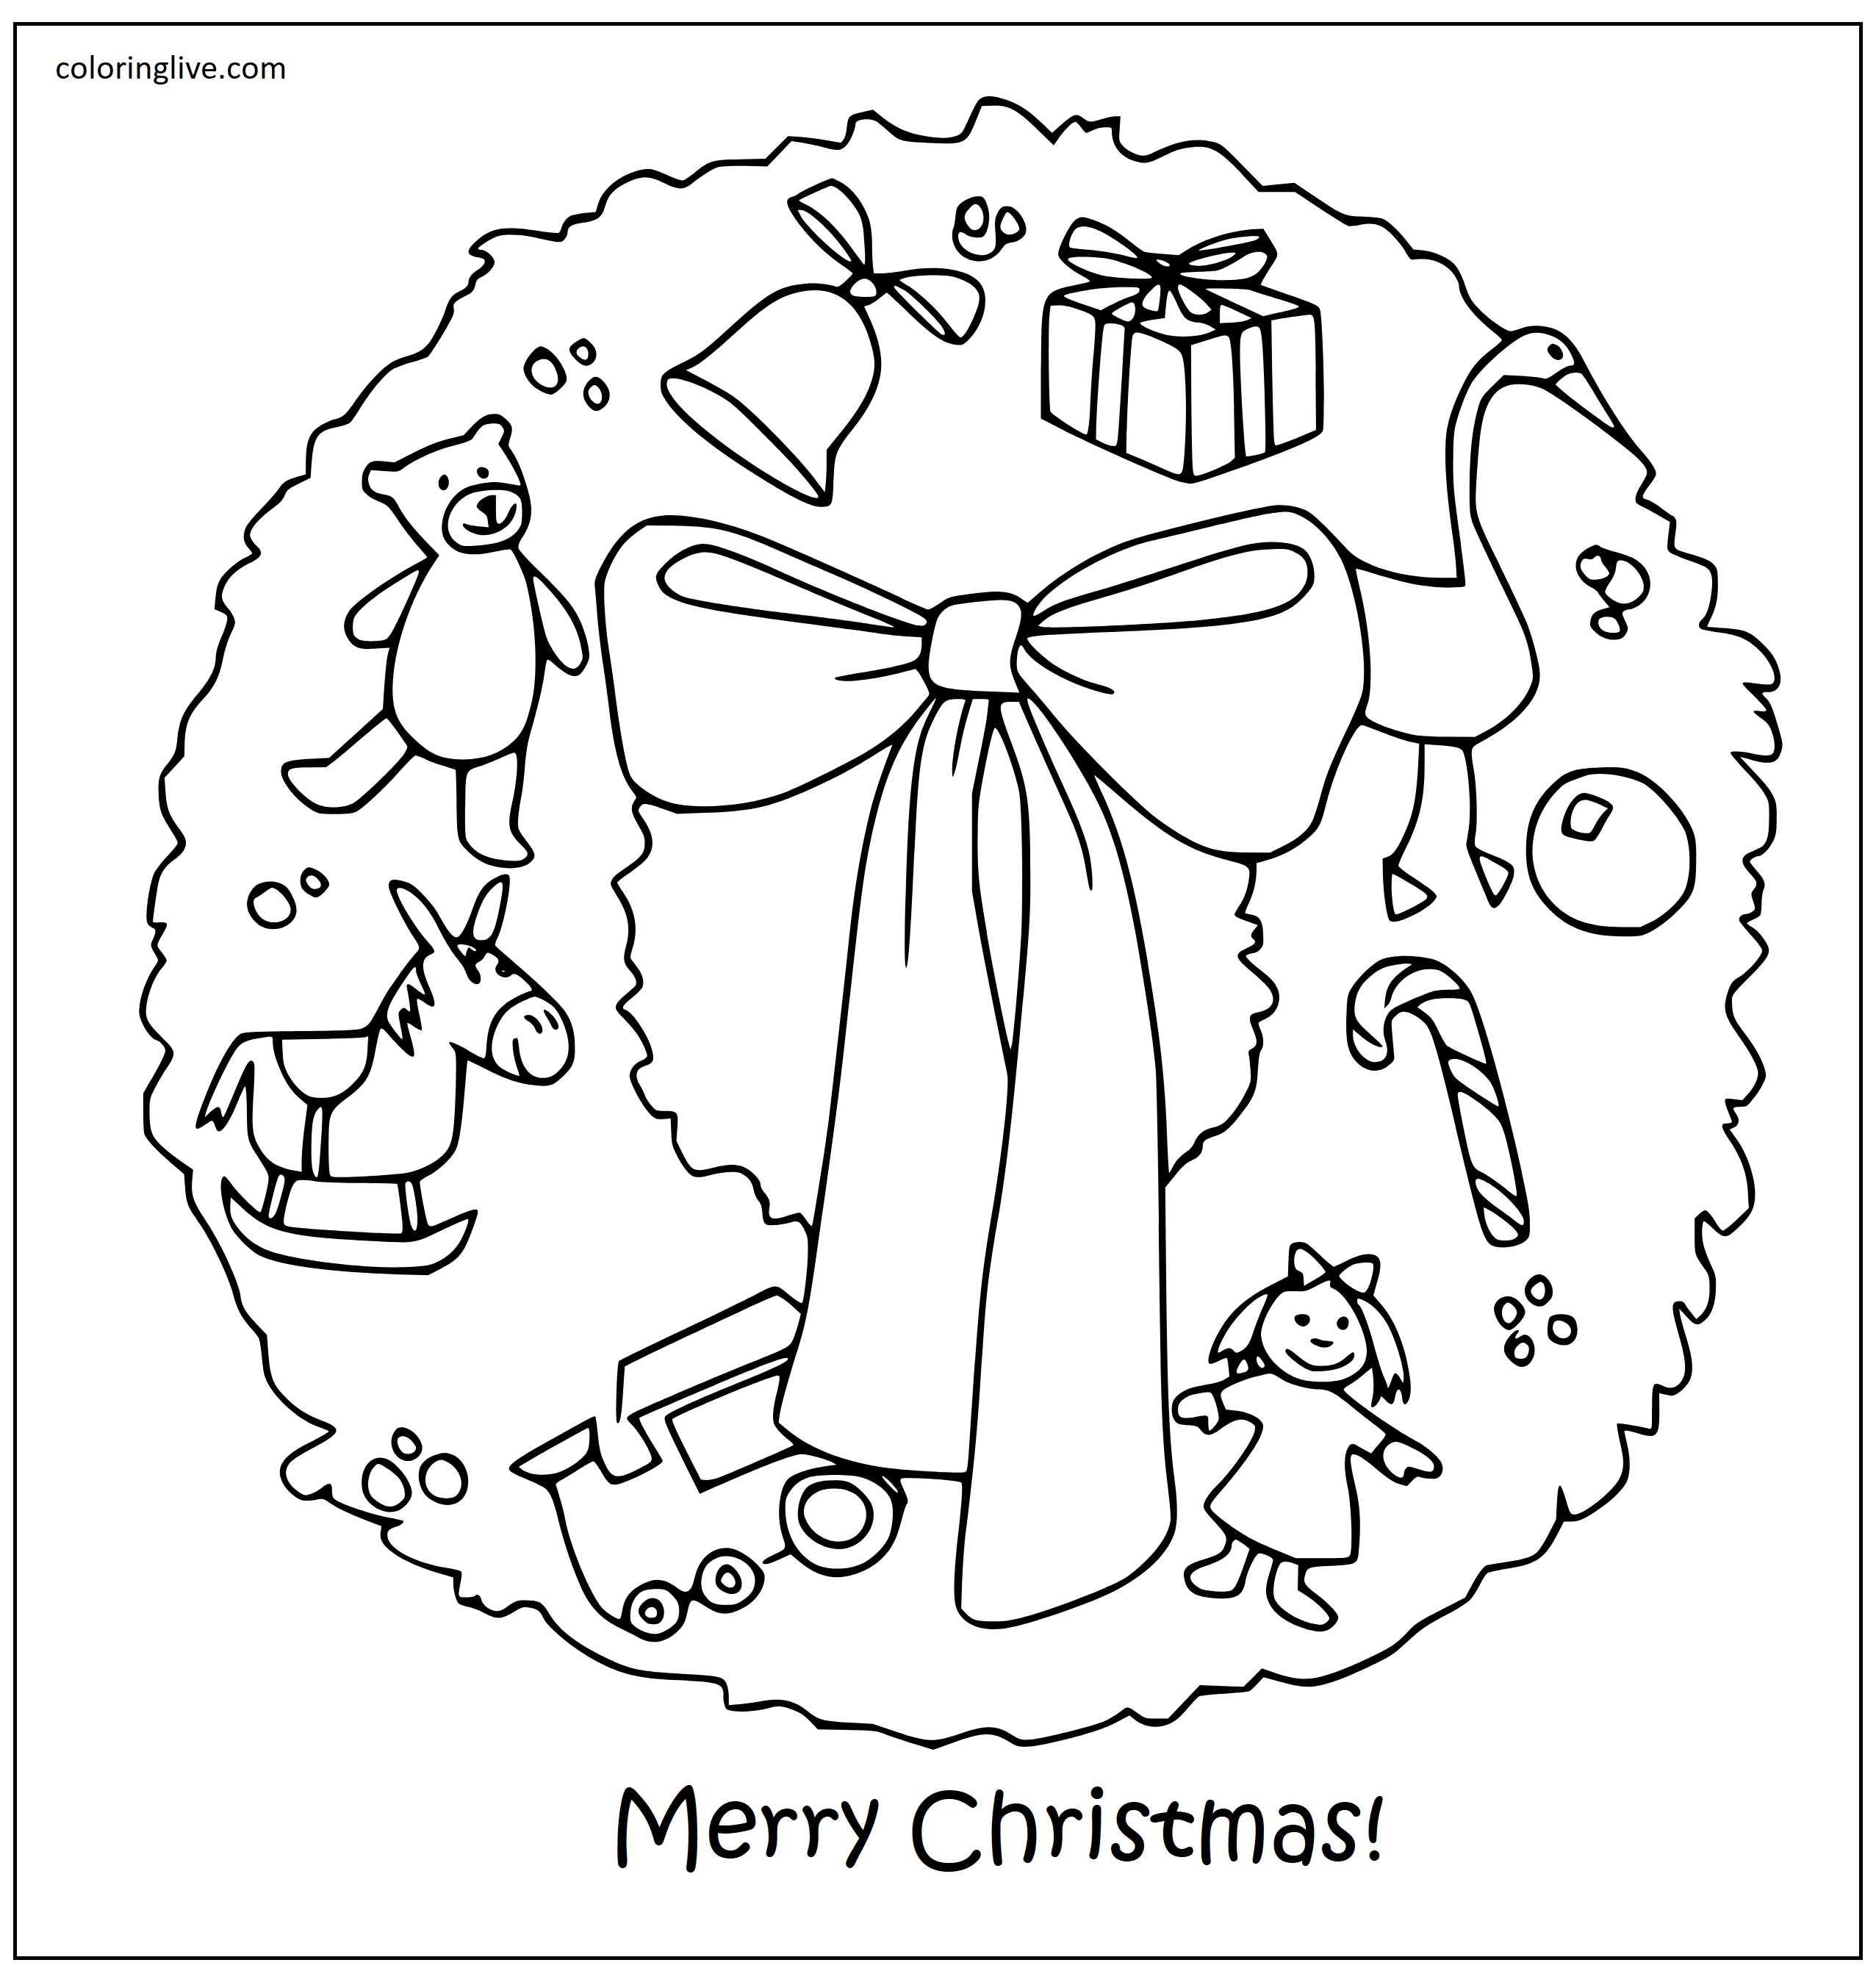 Printable Wreath with Christmas Gifts Coloring Page for kids.